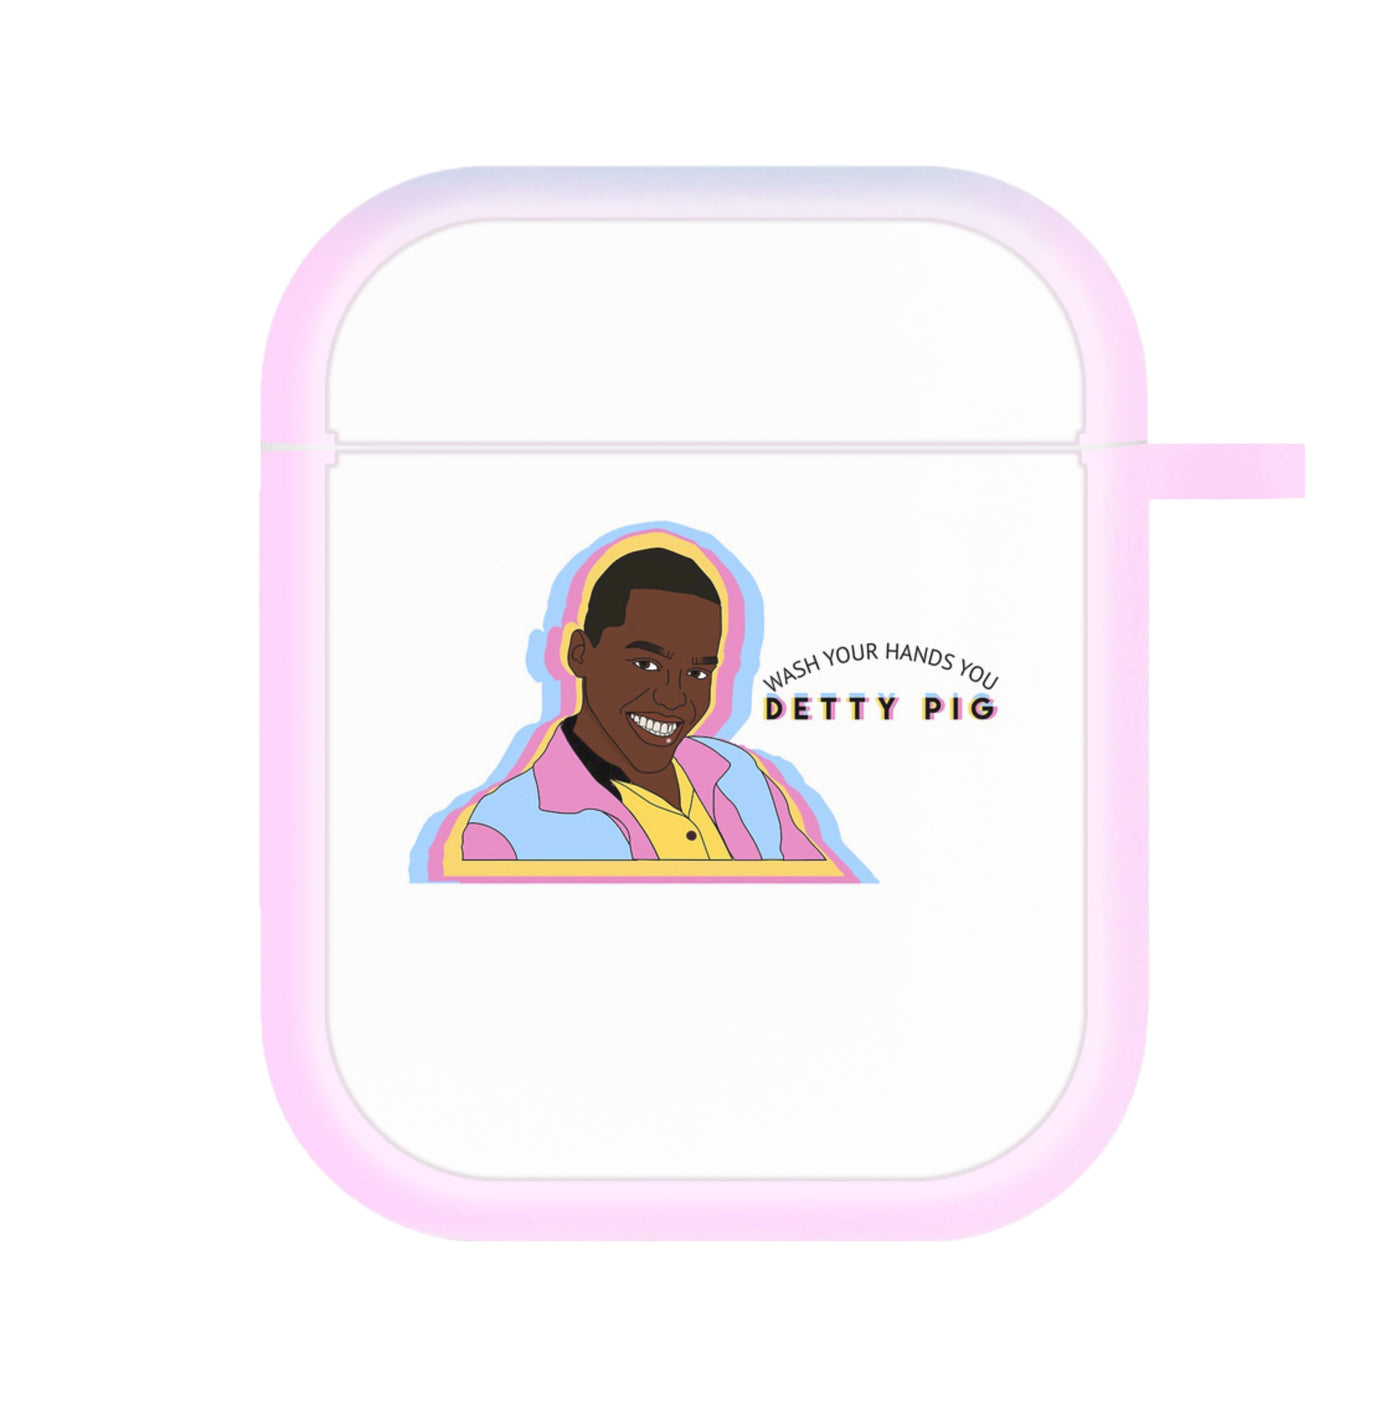 Wash Your Hands You Detty Pig - Sex Education AirPods Case